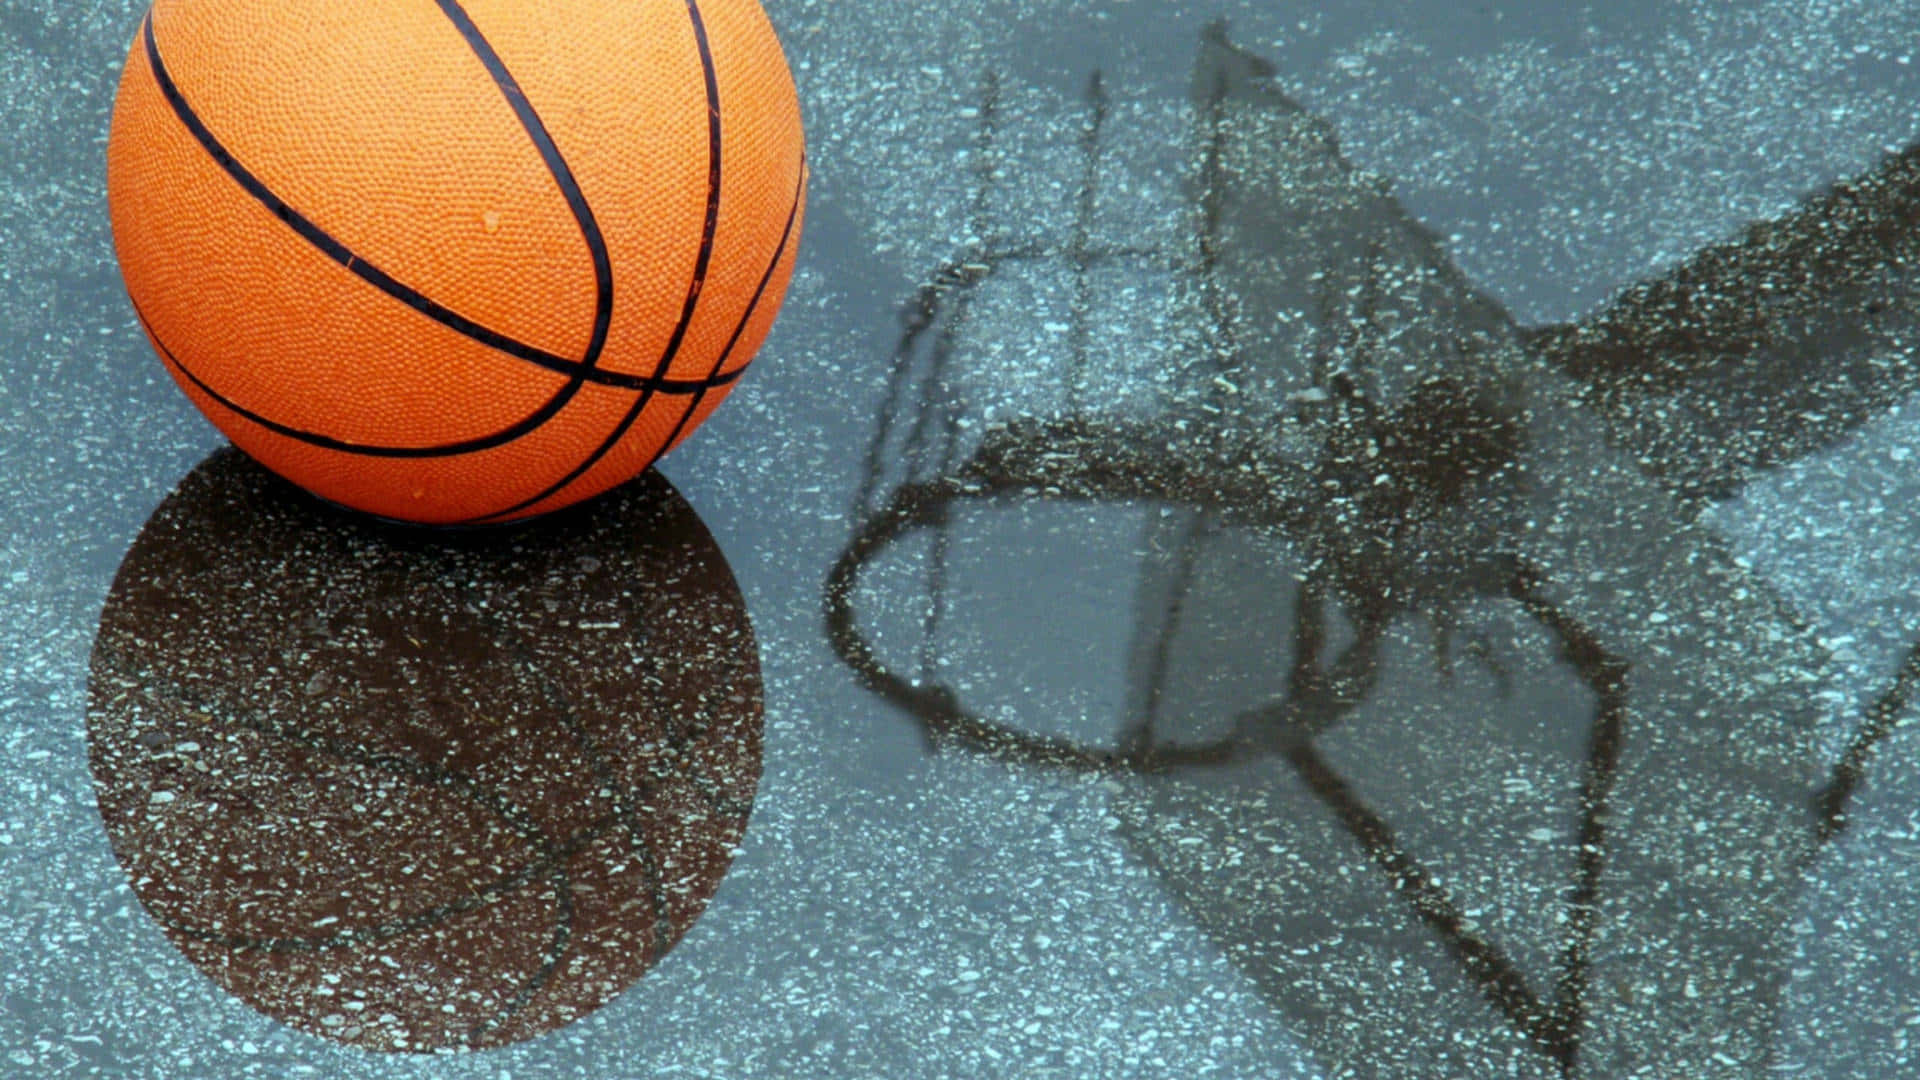 Hd Background Of Basketball On Puddled Ground